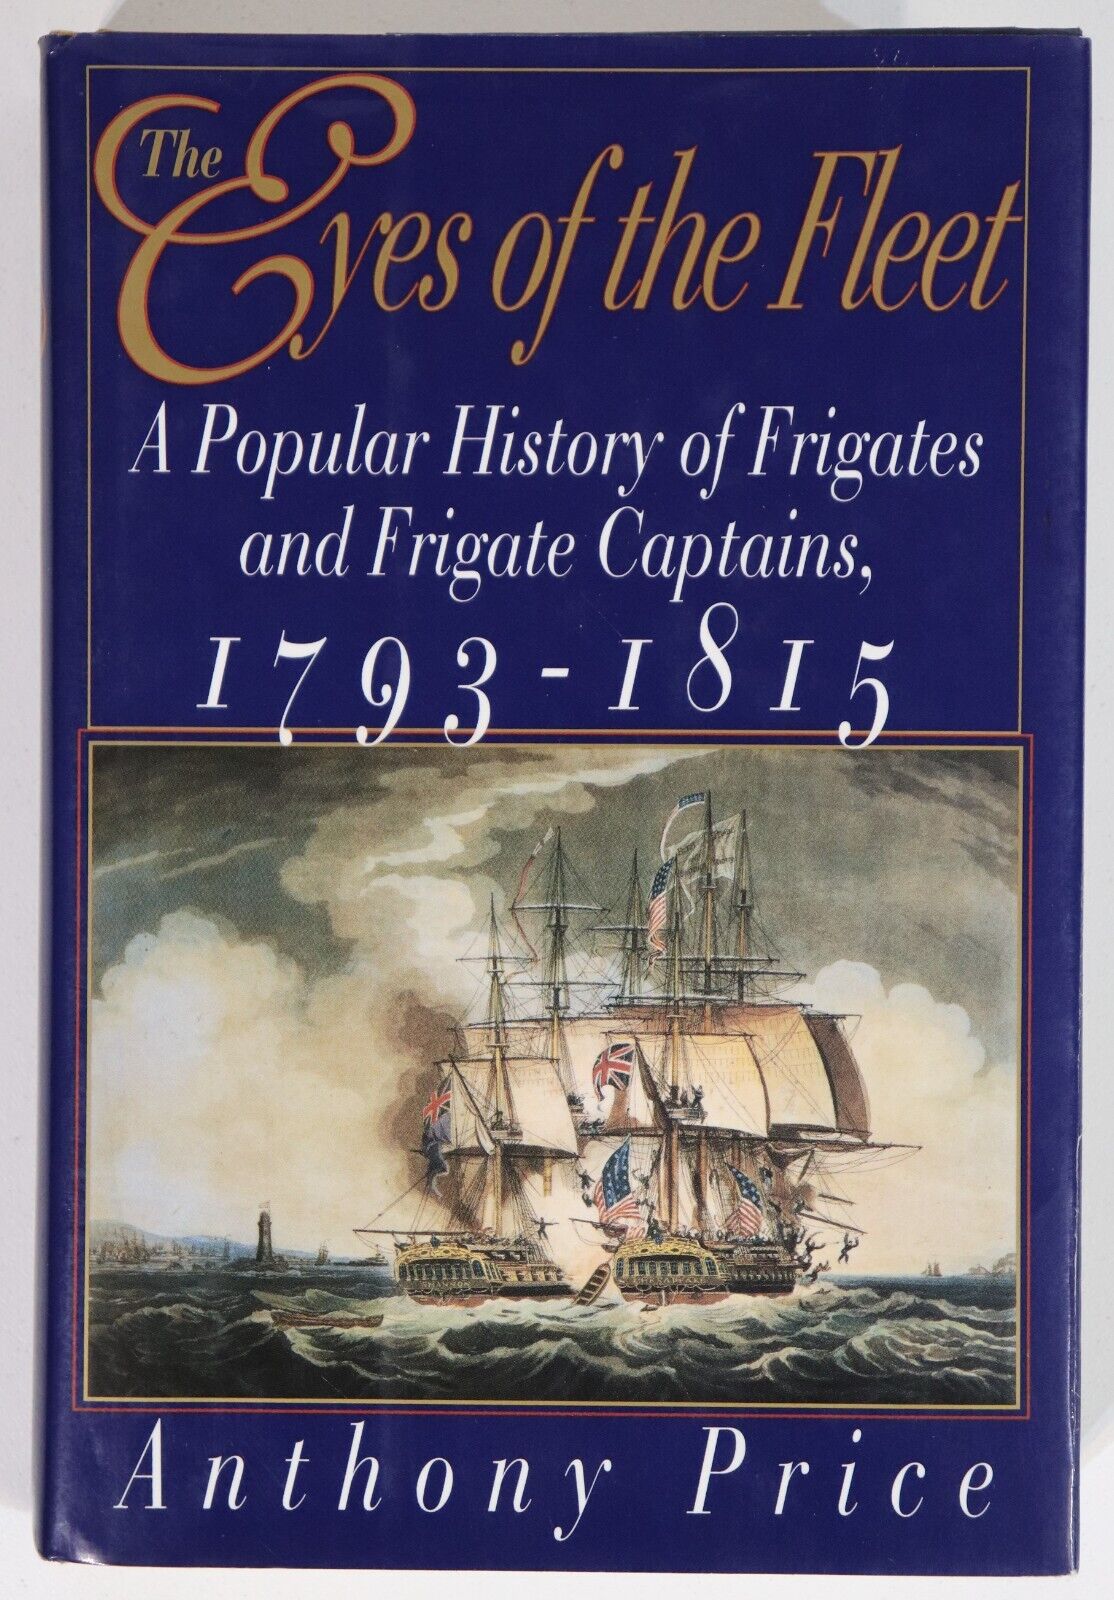 The Eyes Of The Fleet by Anthony Price - 1996 - Maritime History Book